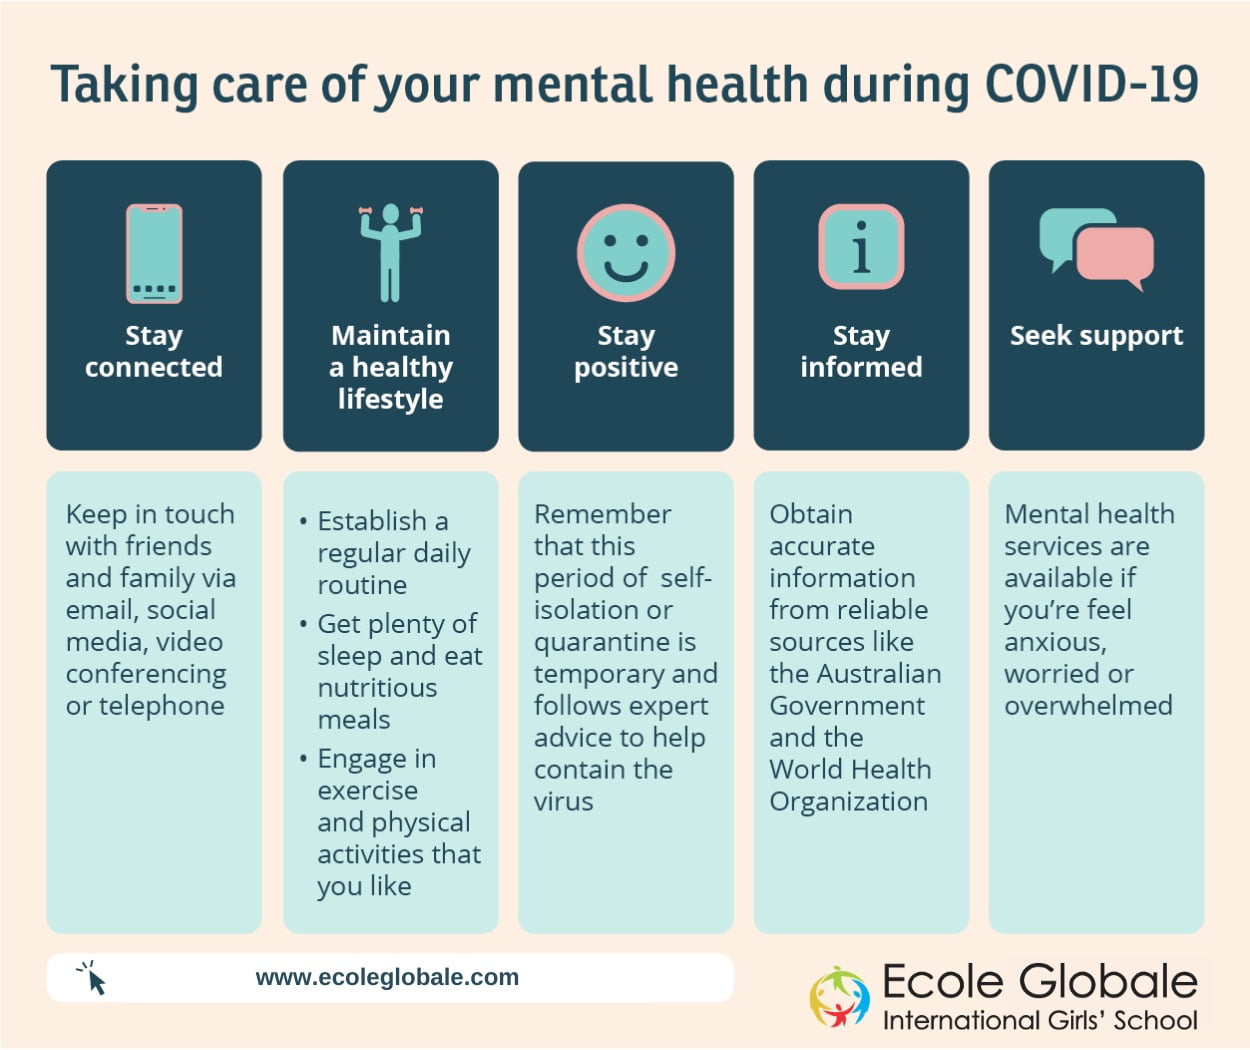 How to maintain good mental health during COVID-19 lockdown